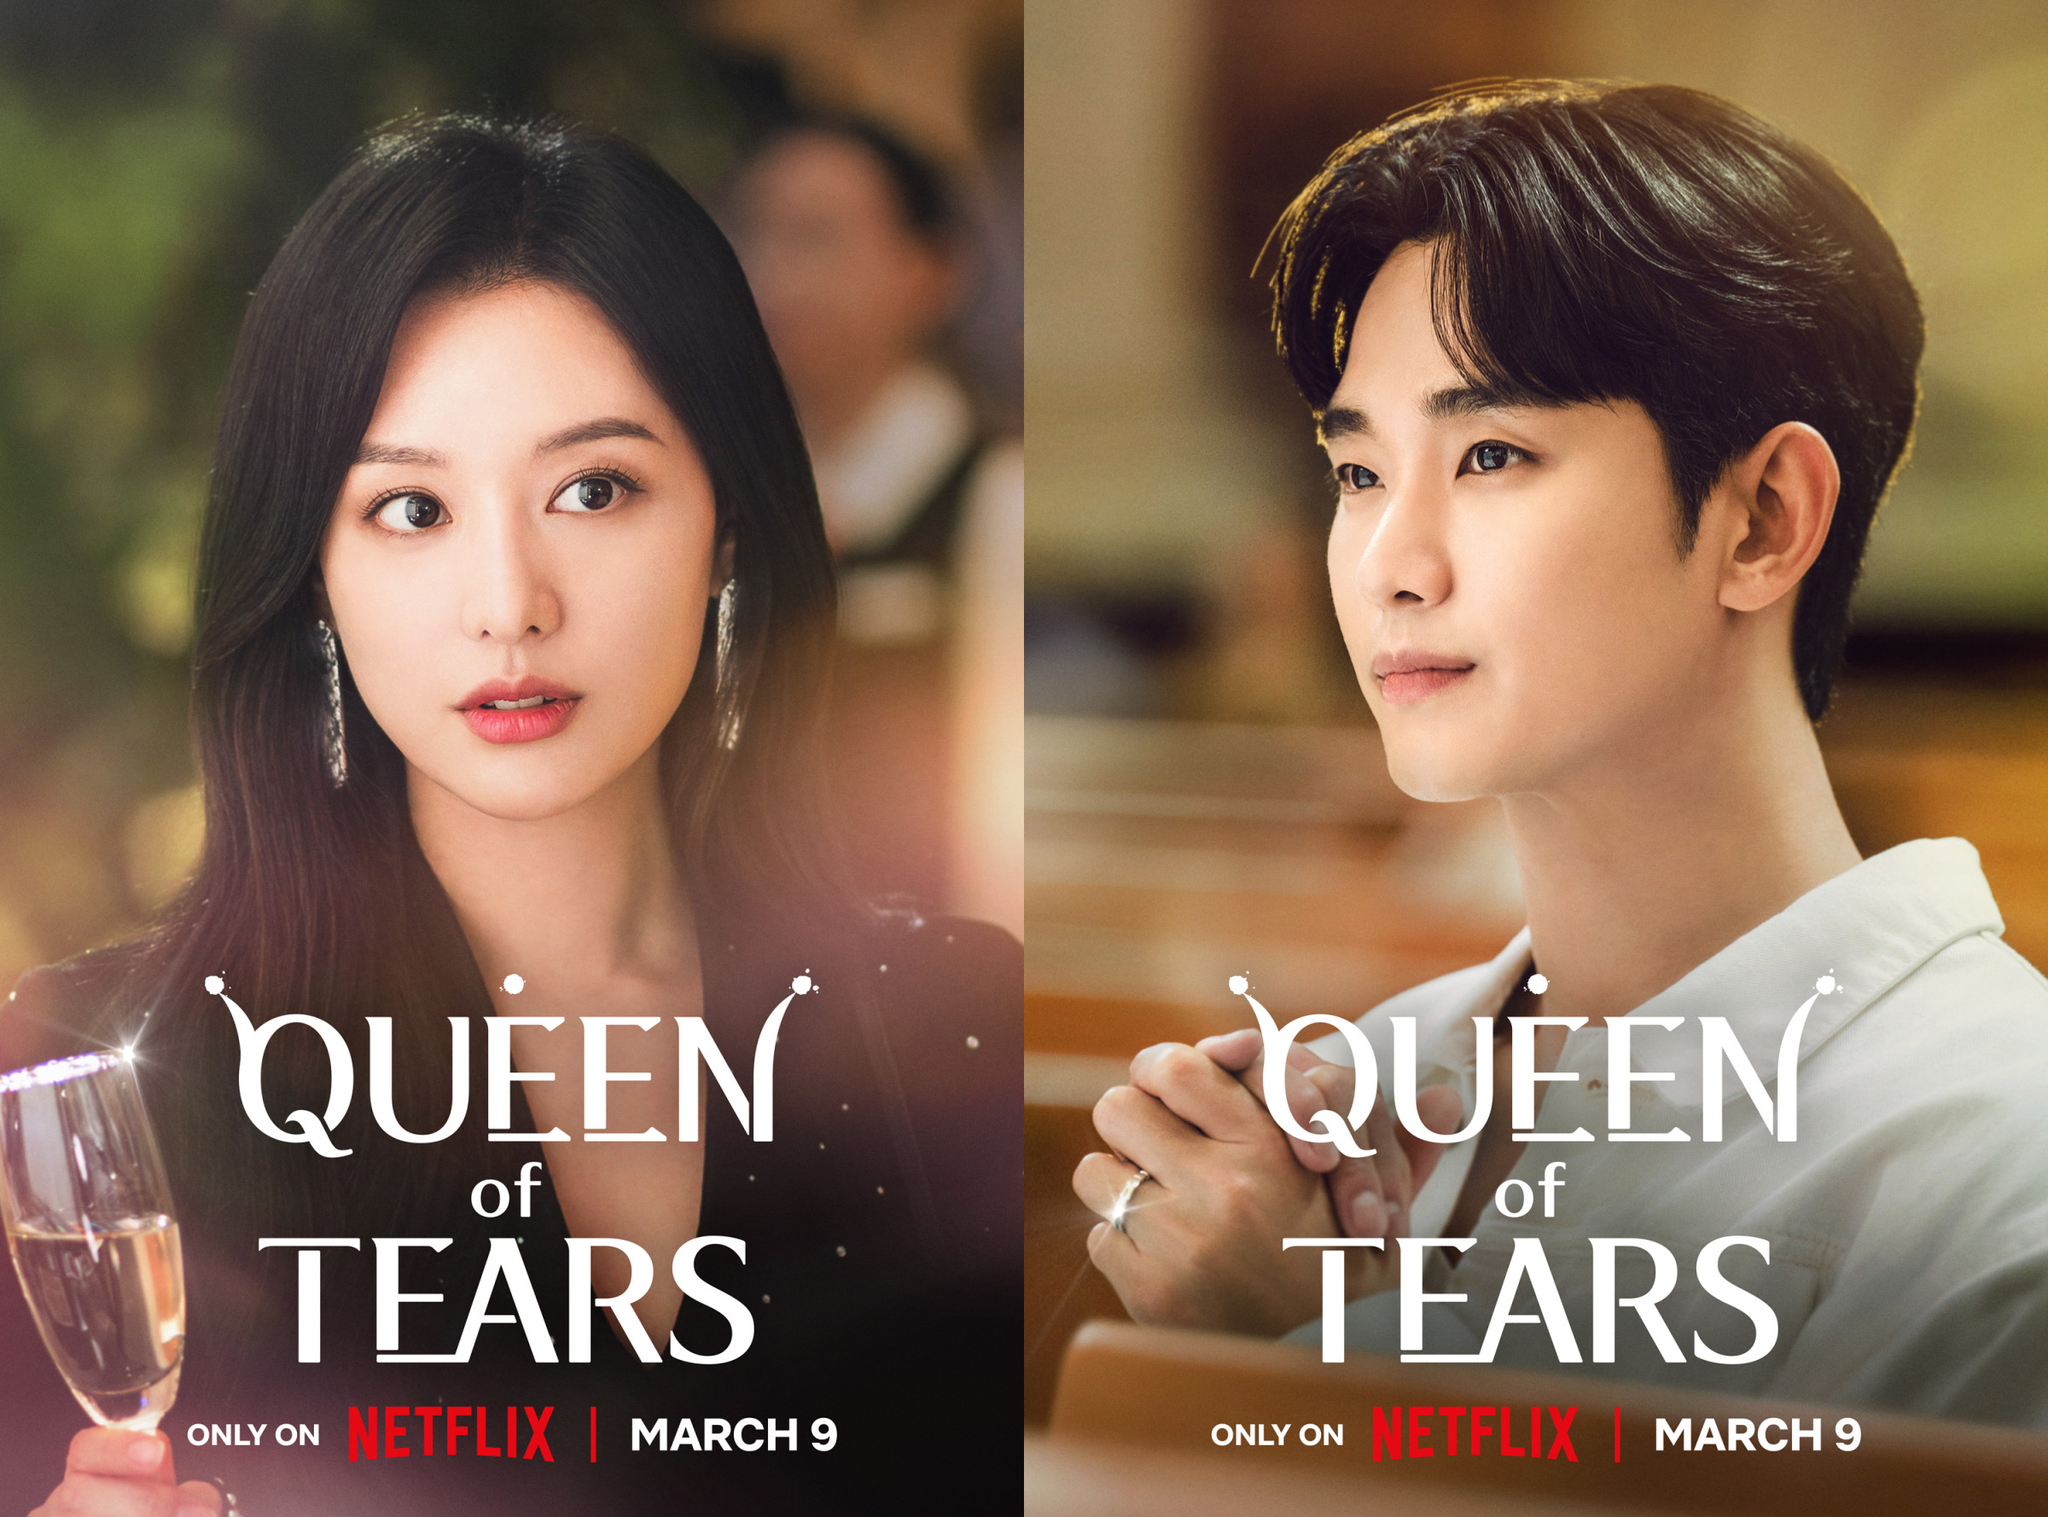 Queen of Tears: A Royal Drama Fit for the Throne of Your Binge List